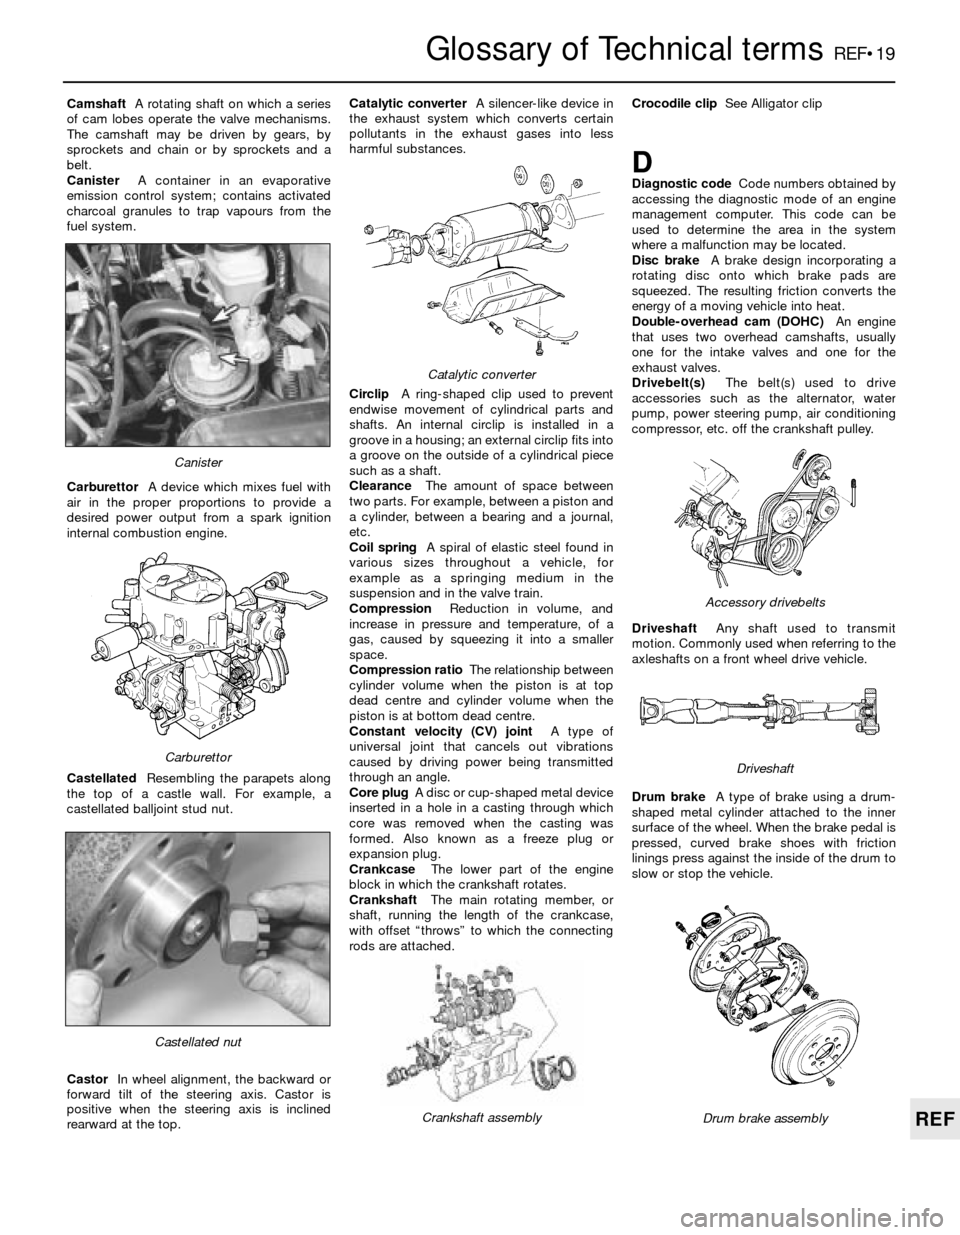 FORD SIERRA 1983 1.G Reference User Guide Glossary of Technical termsREF•19
REF
CamshaftA rotating shaft on which a series
of cam lobes operate the valve mechanisms.
The camshaft may be driven by gears, by
sprockets and chain or by sprocket